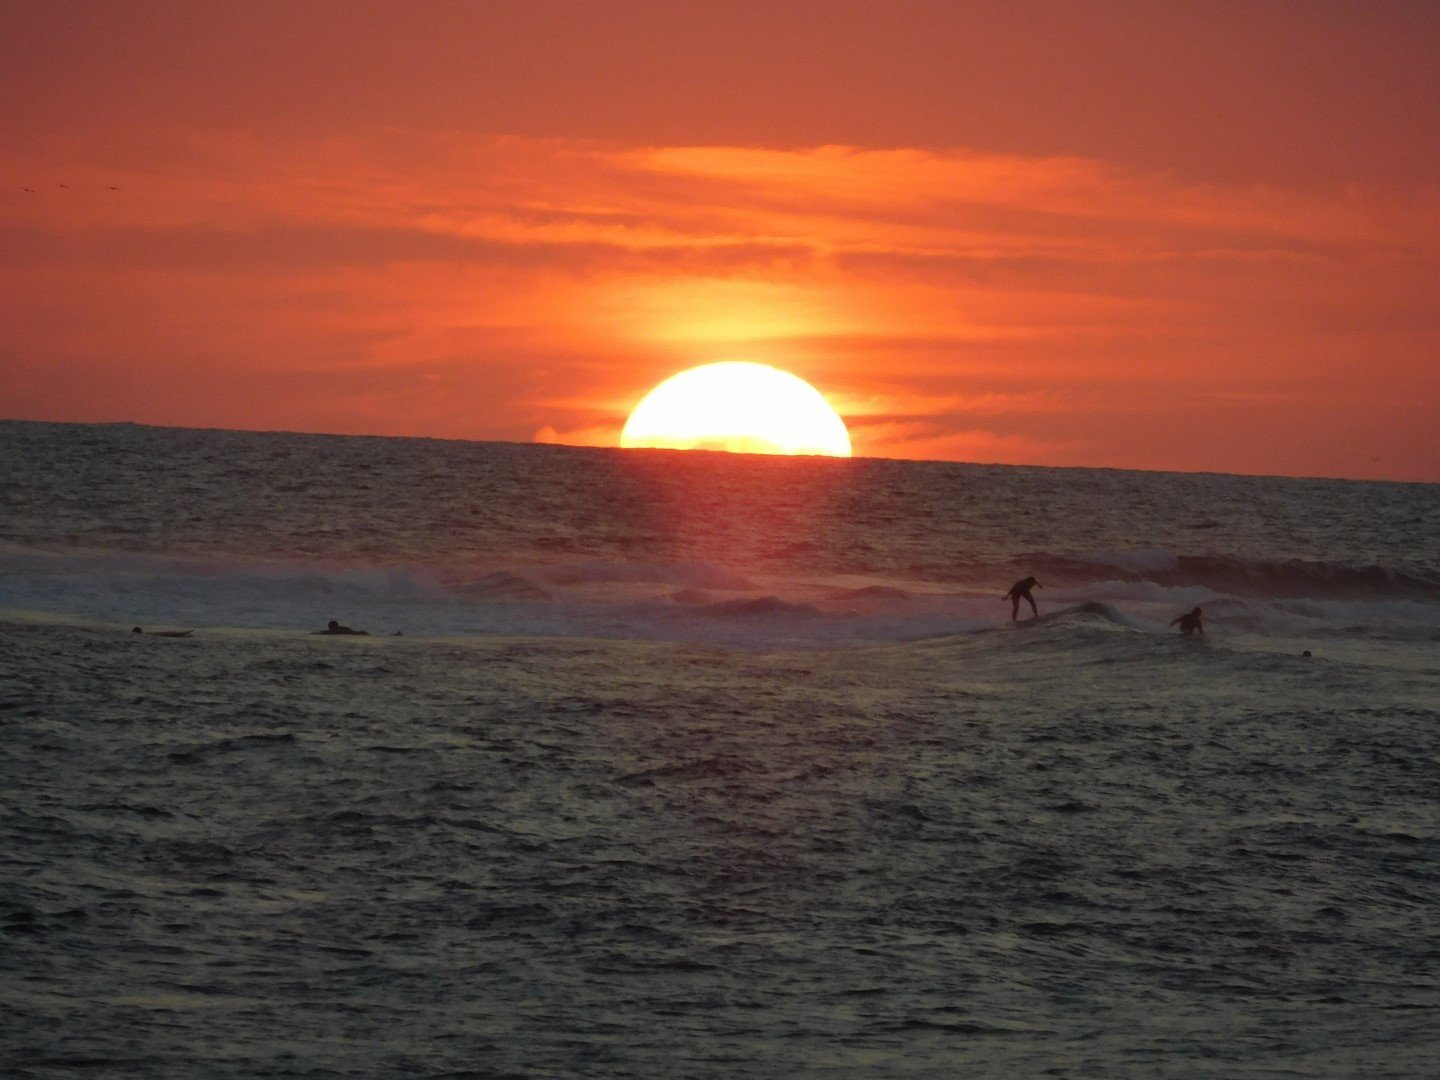 Surfs up as the sun goes down